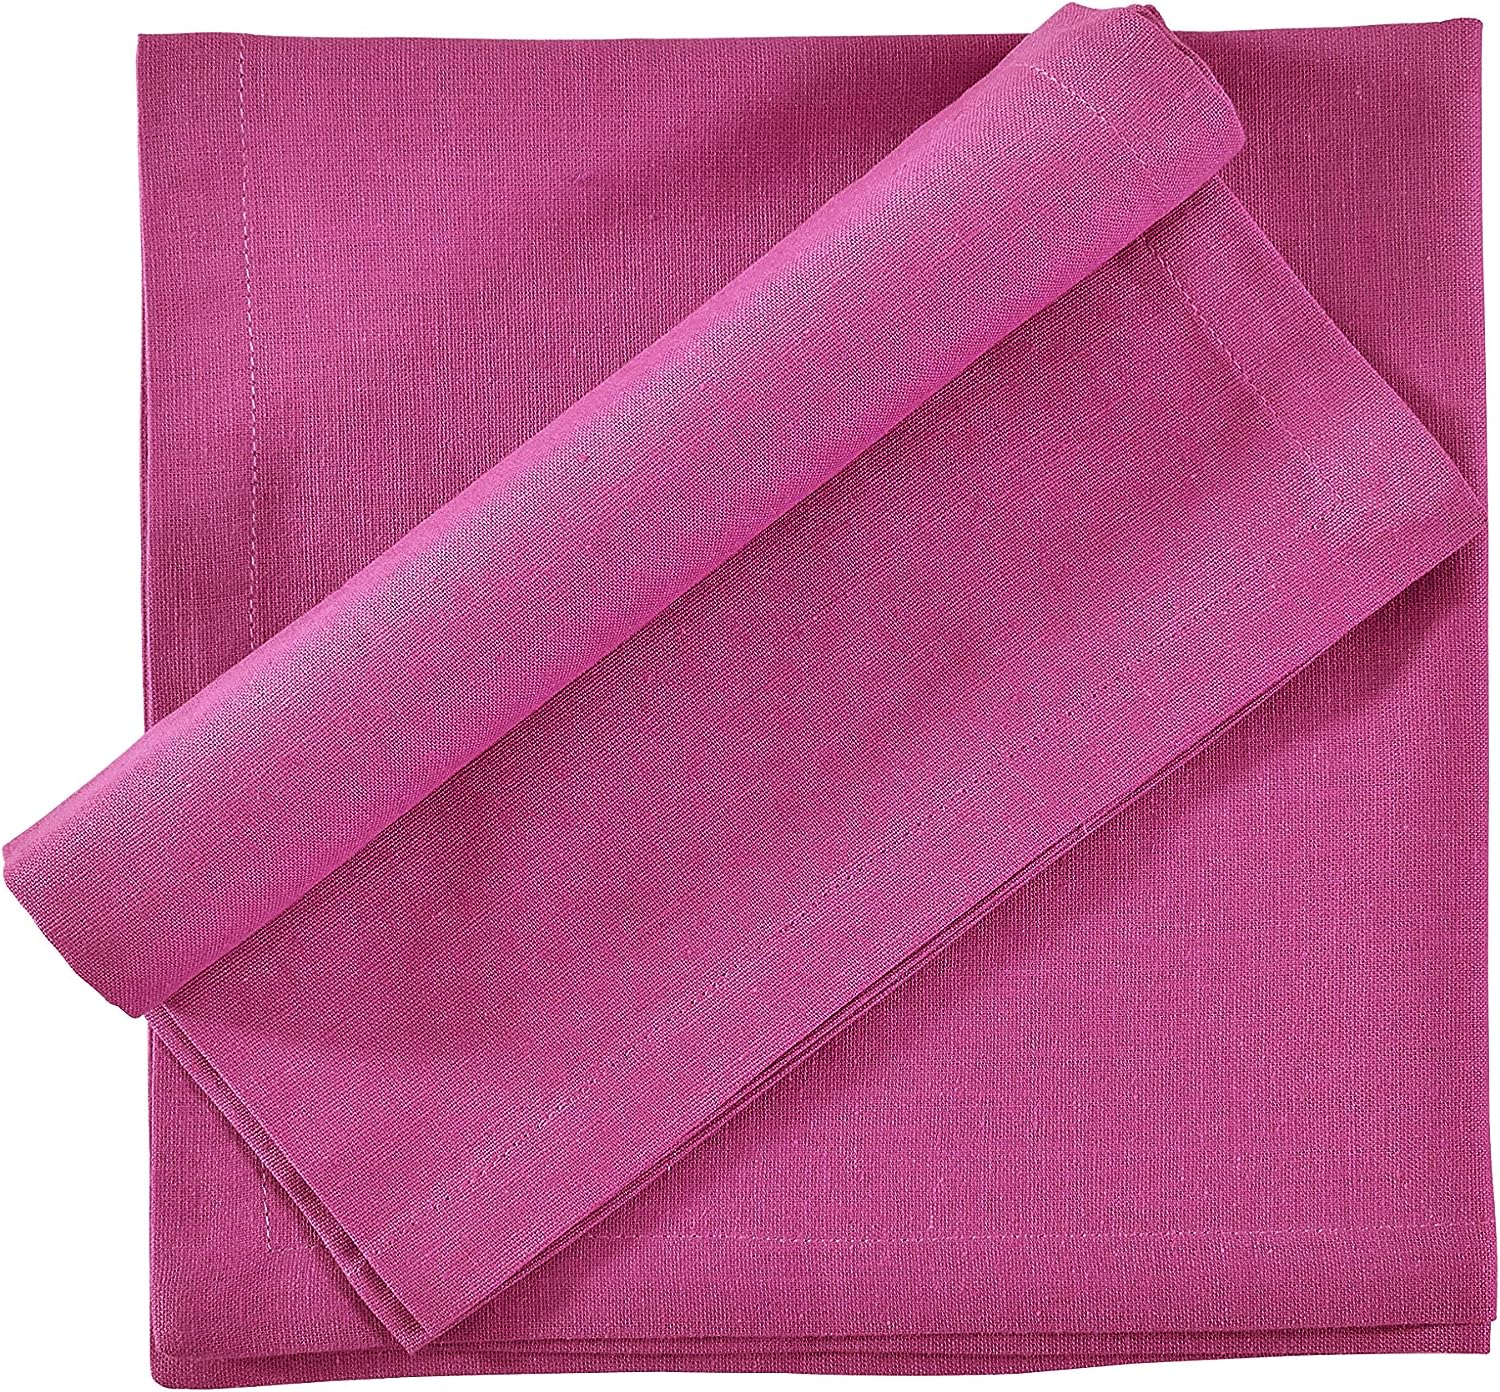 FINGERCRAFT Dinner Cloth Napkins, Cotton Linen Blend Fabric 12 Pack Easter Special, Premium Quality, Mitered Corners for Every Day Use Napkins are Pre Shrunk and Good Absorbency Magenta 3